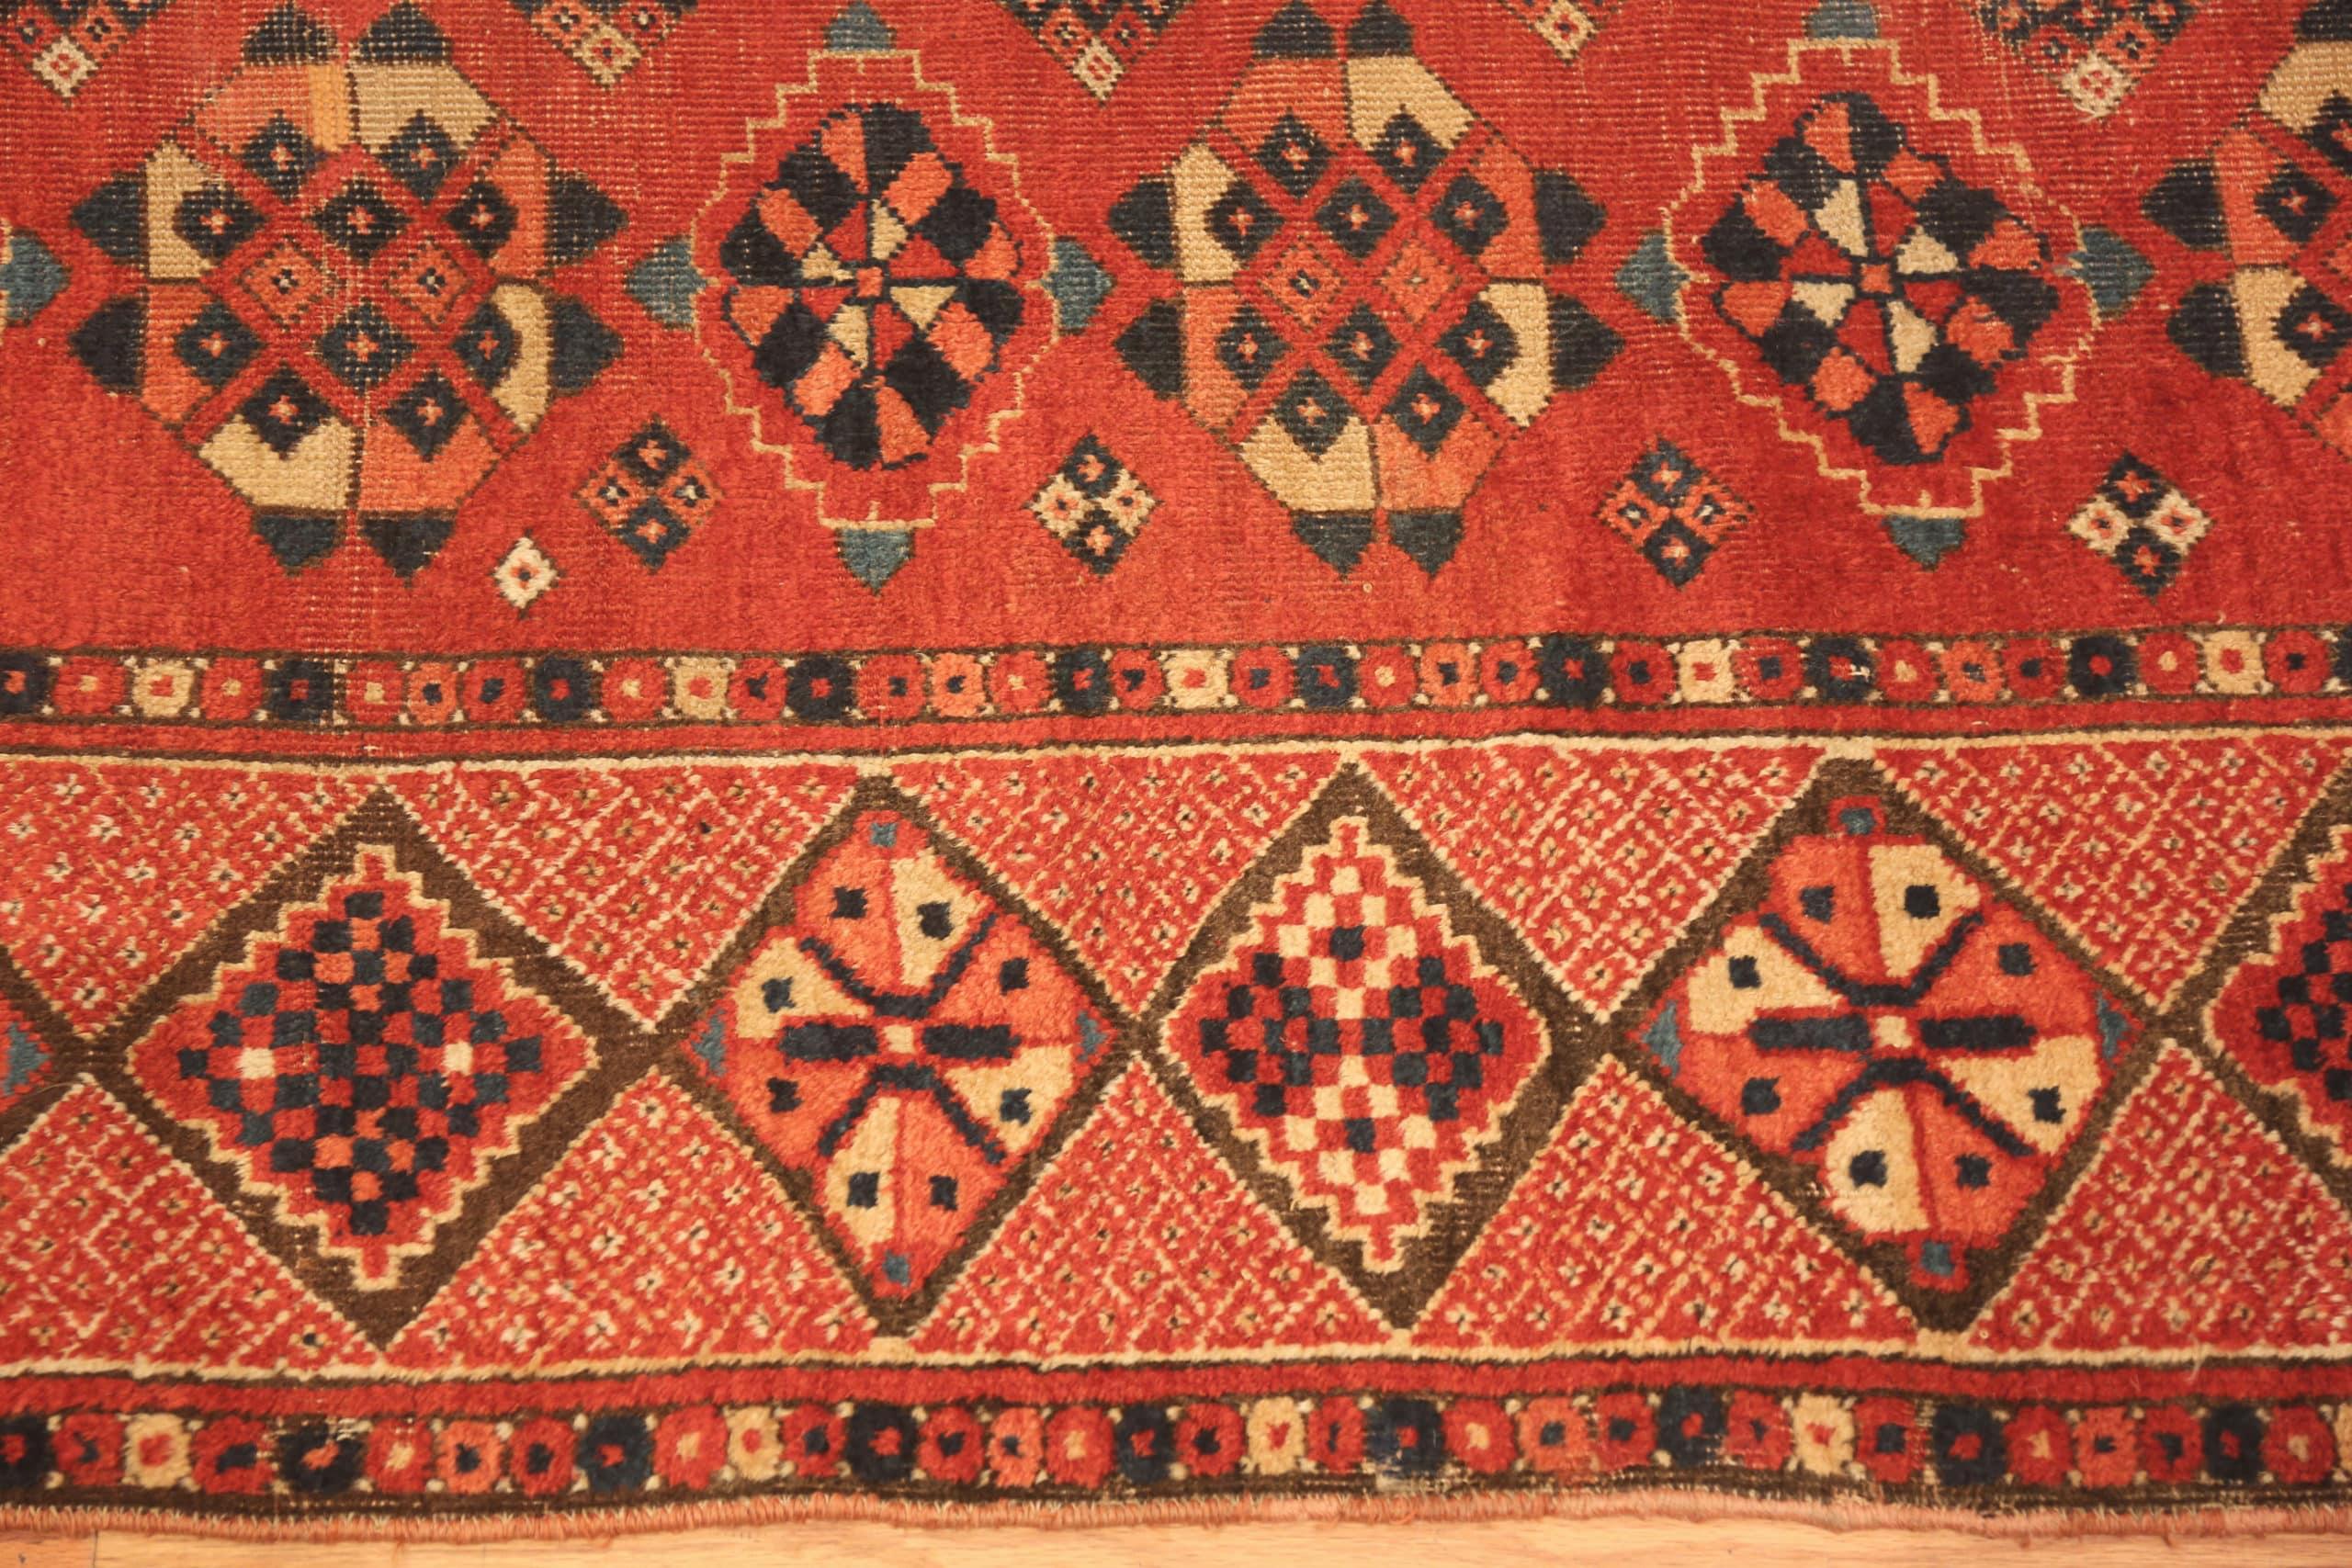 Gallery Size Antique Afghan Bashir Rug, Country of Origin: Afghanistan Rugs, Circa date: 1880. Size: 6 ft 7 in x 15 ft 9 in (2.01 m x 4.8 m)

